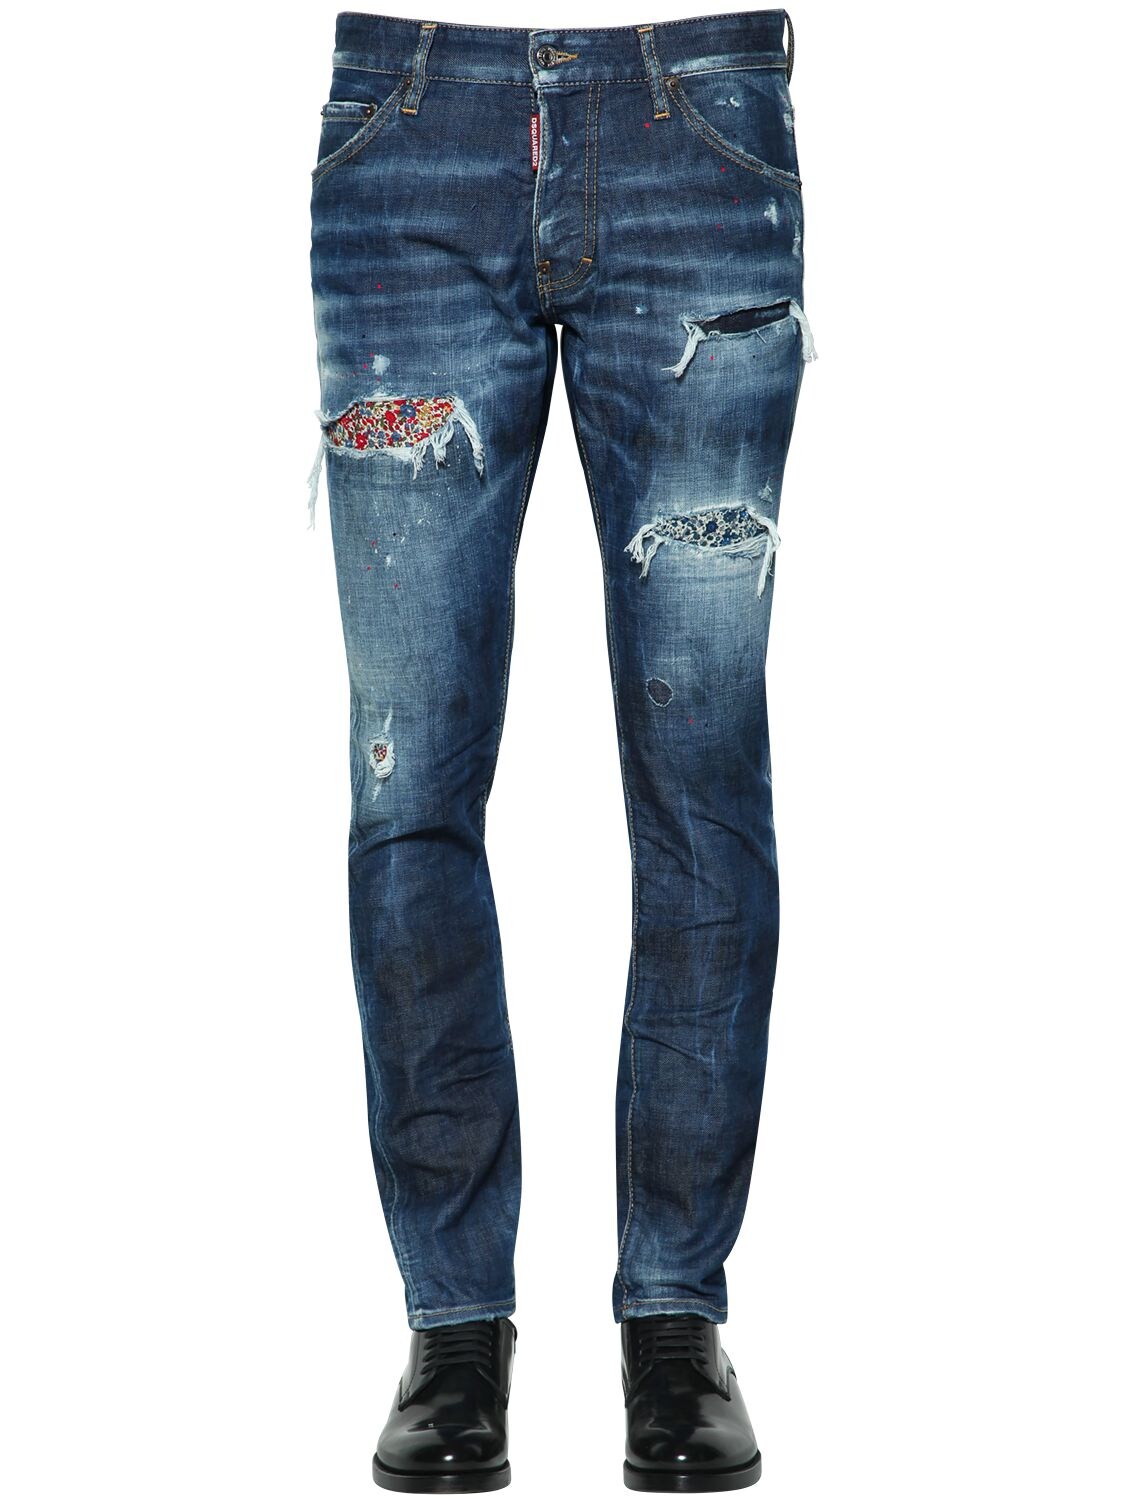 DSQUARED2 16.5CM COOL GUY FLORAL PATCH DENIM JEANS,68I04Y013-NDCW0